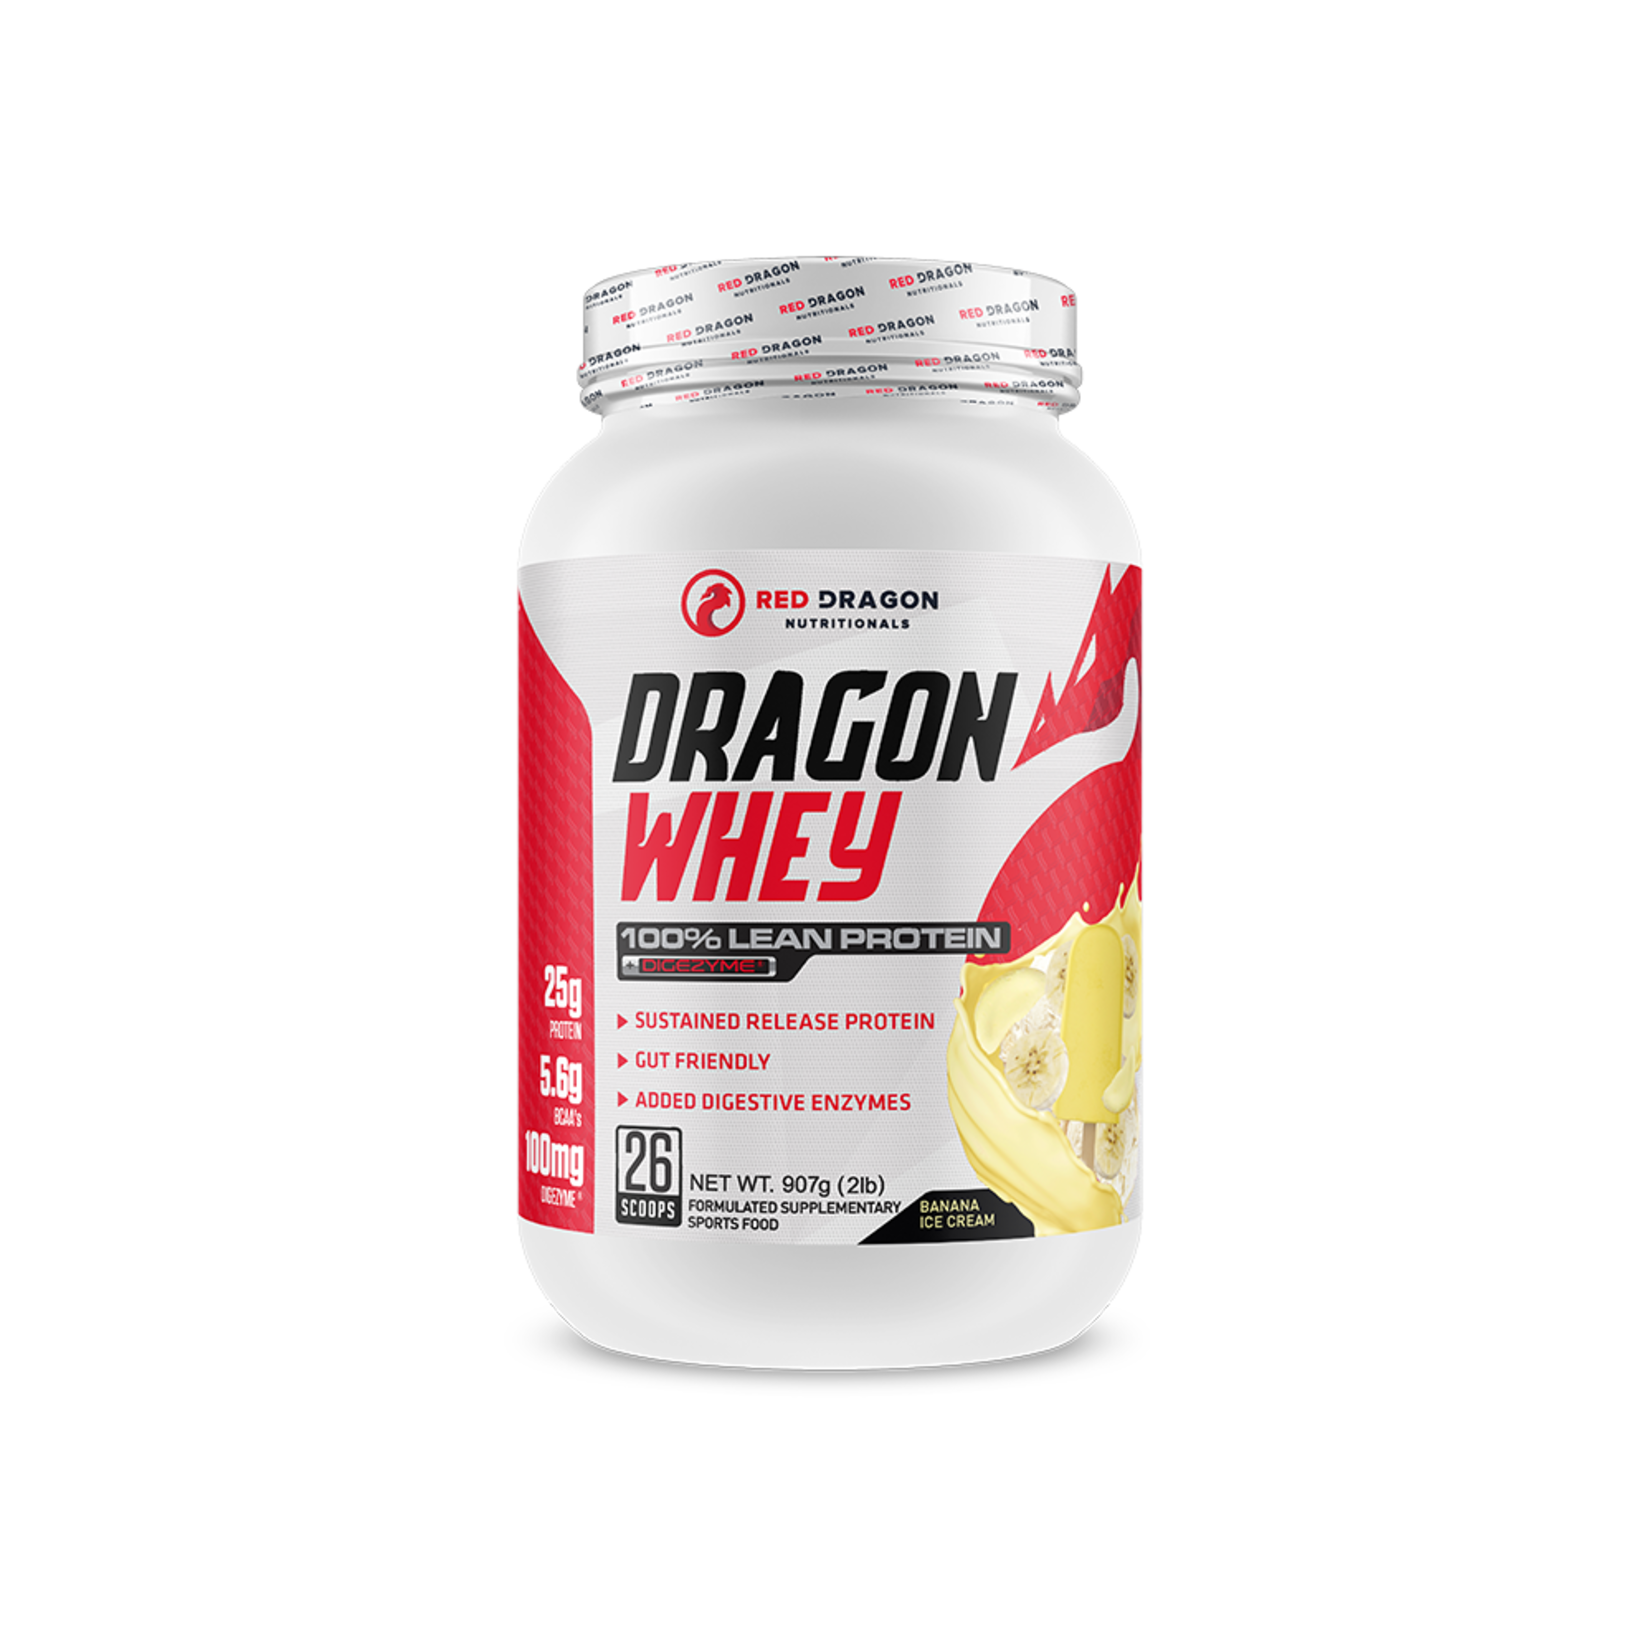 Red Dragon Nutritionals Dragon Whey 100% Lean Protein by Red Dragon Nutritionals